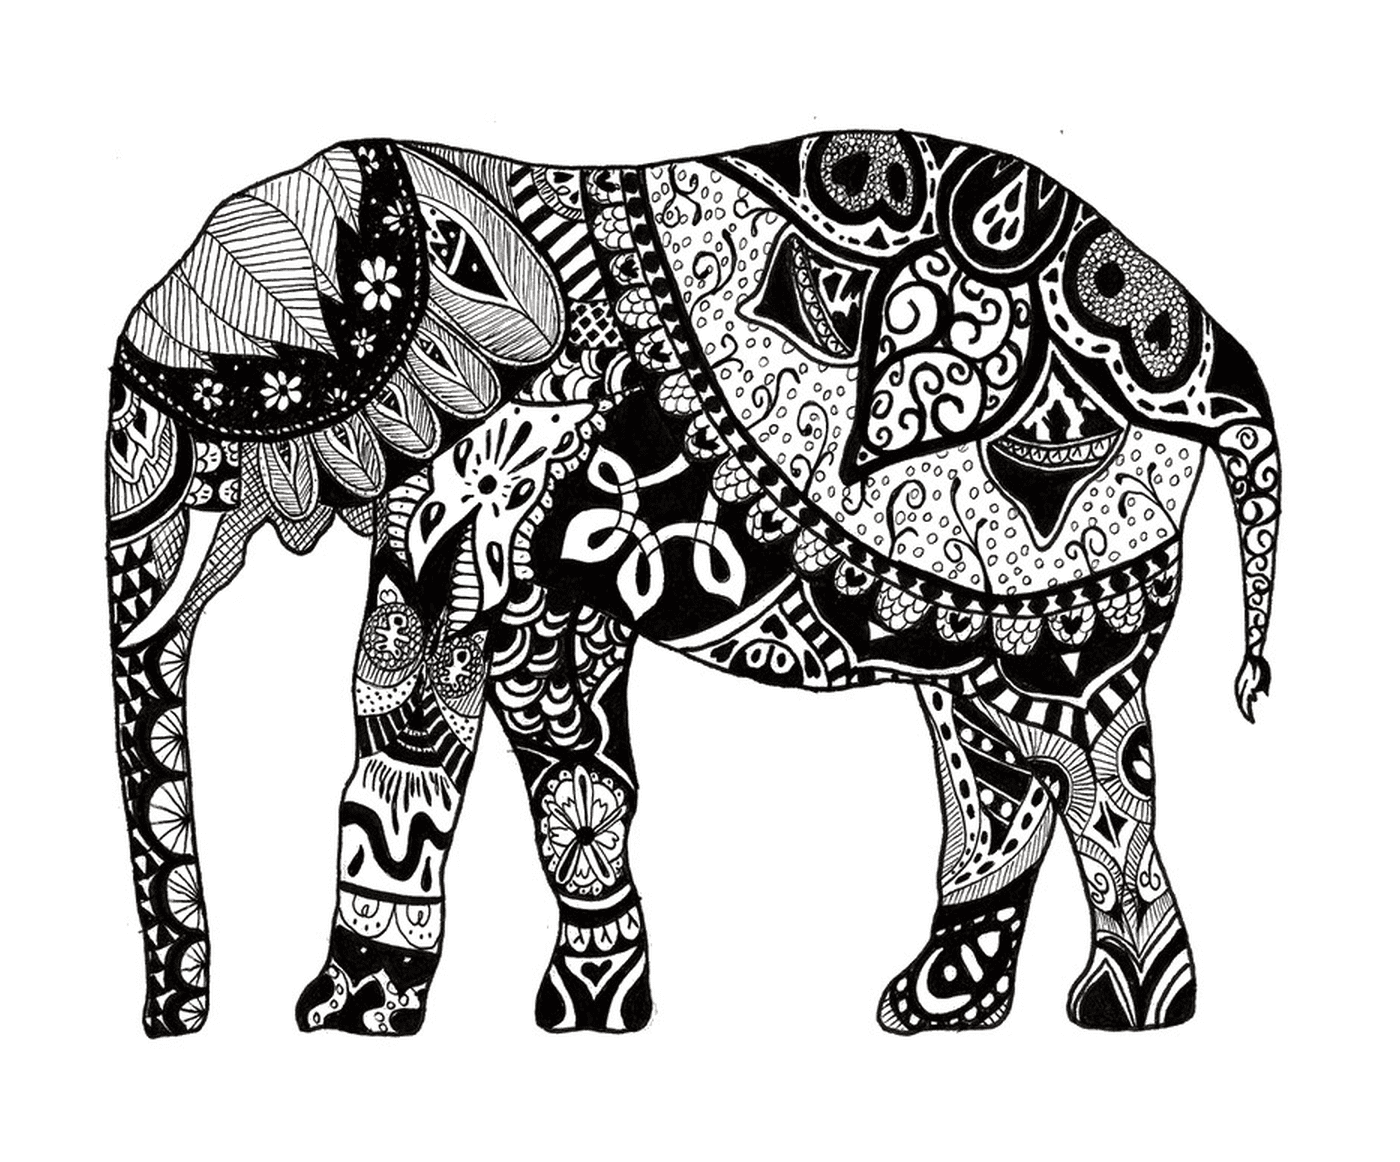  An elephant with many mandalas on his body 